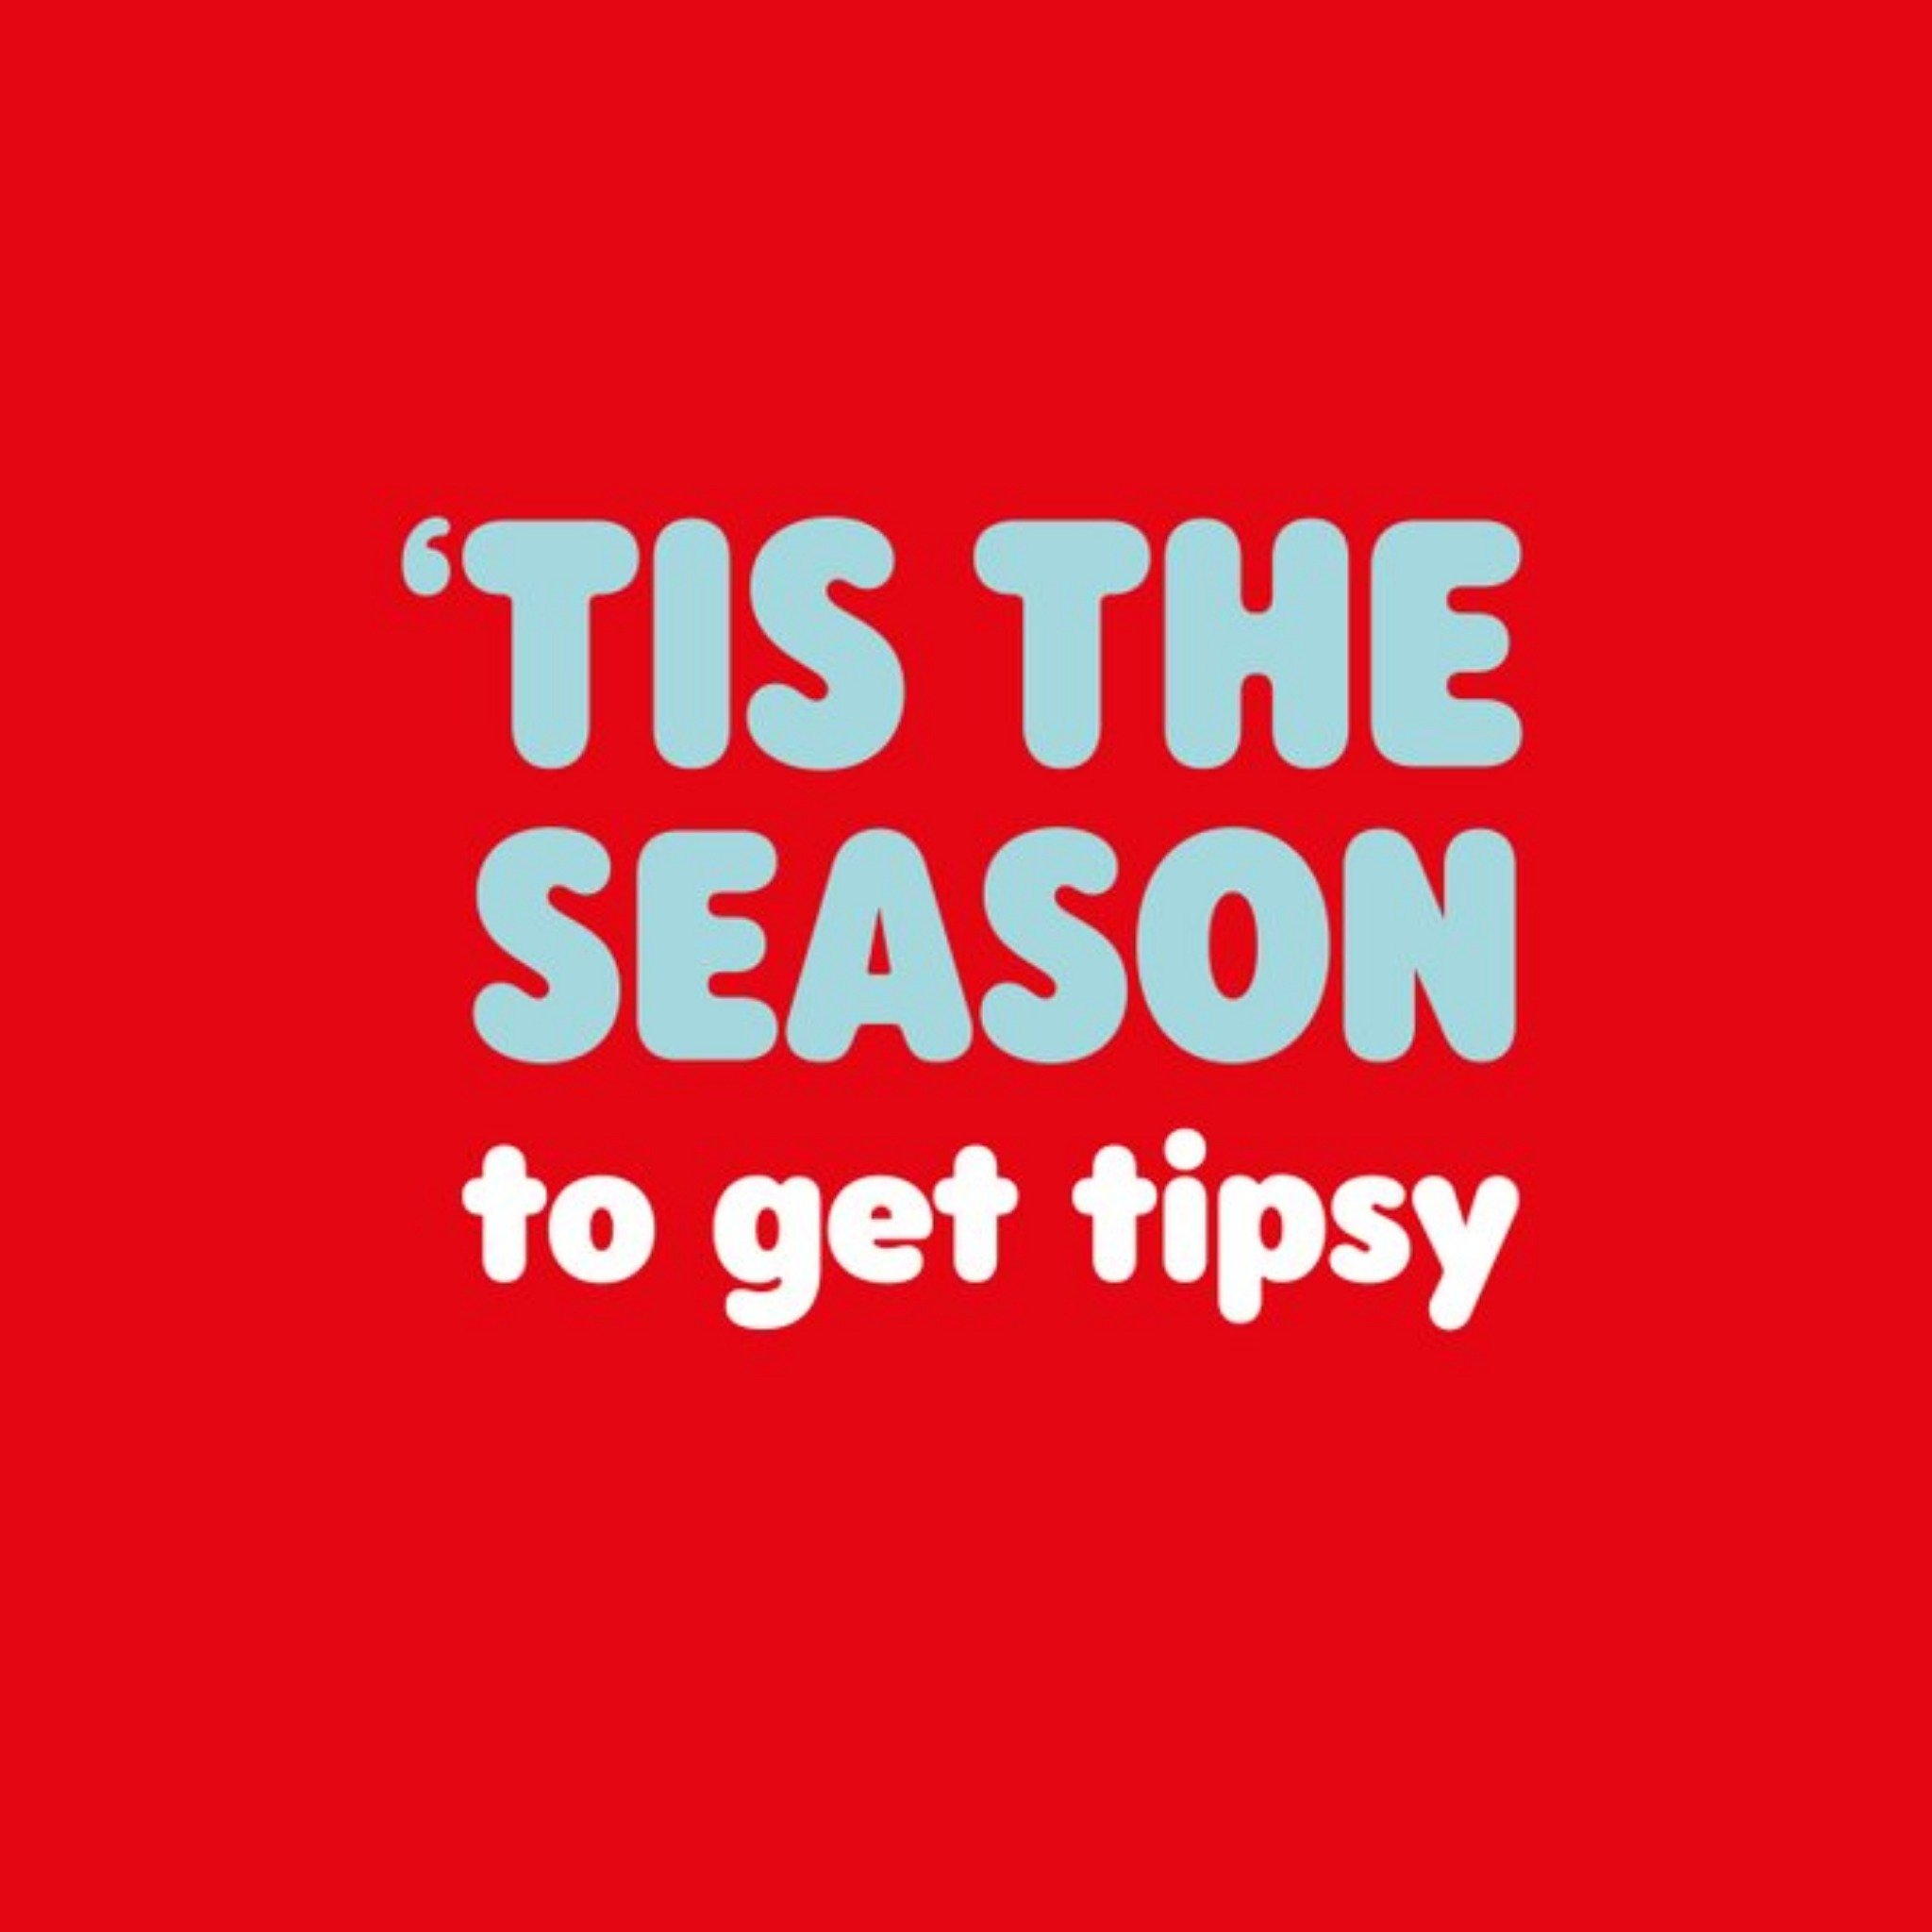 Moonpig Typographical Tis The Season To Get Tipsy Christmas Card, Square